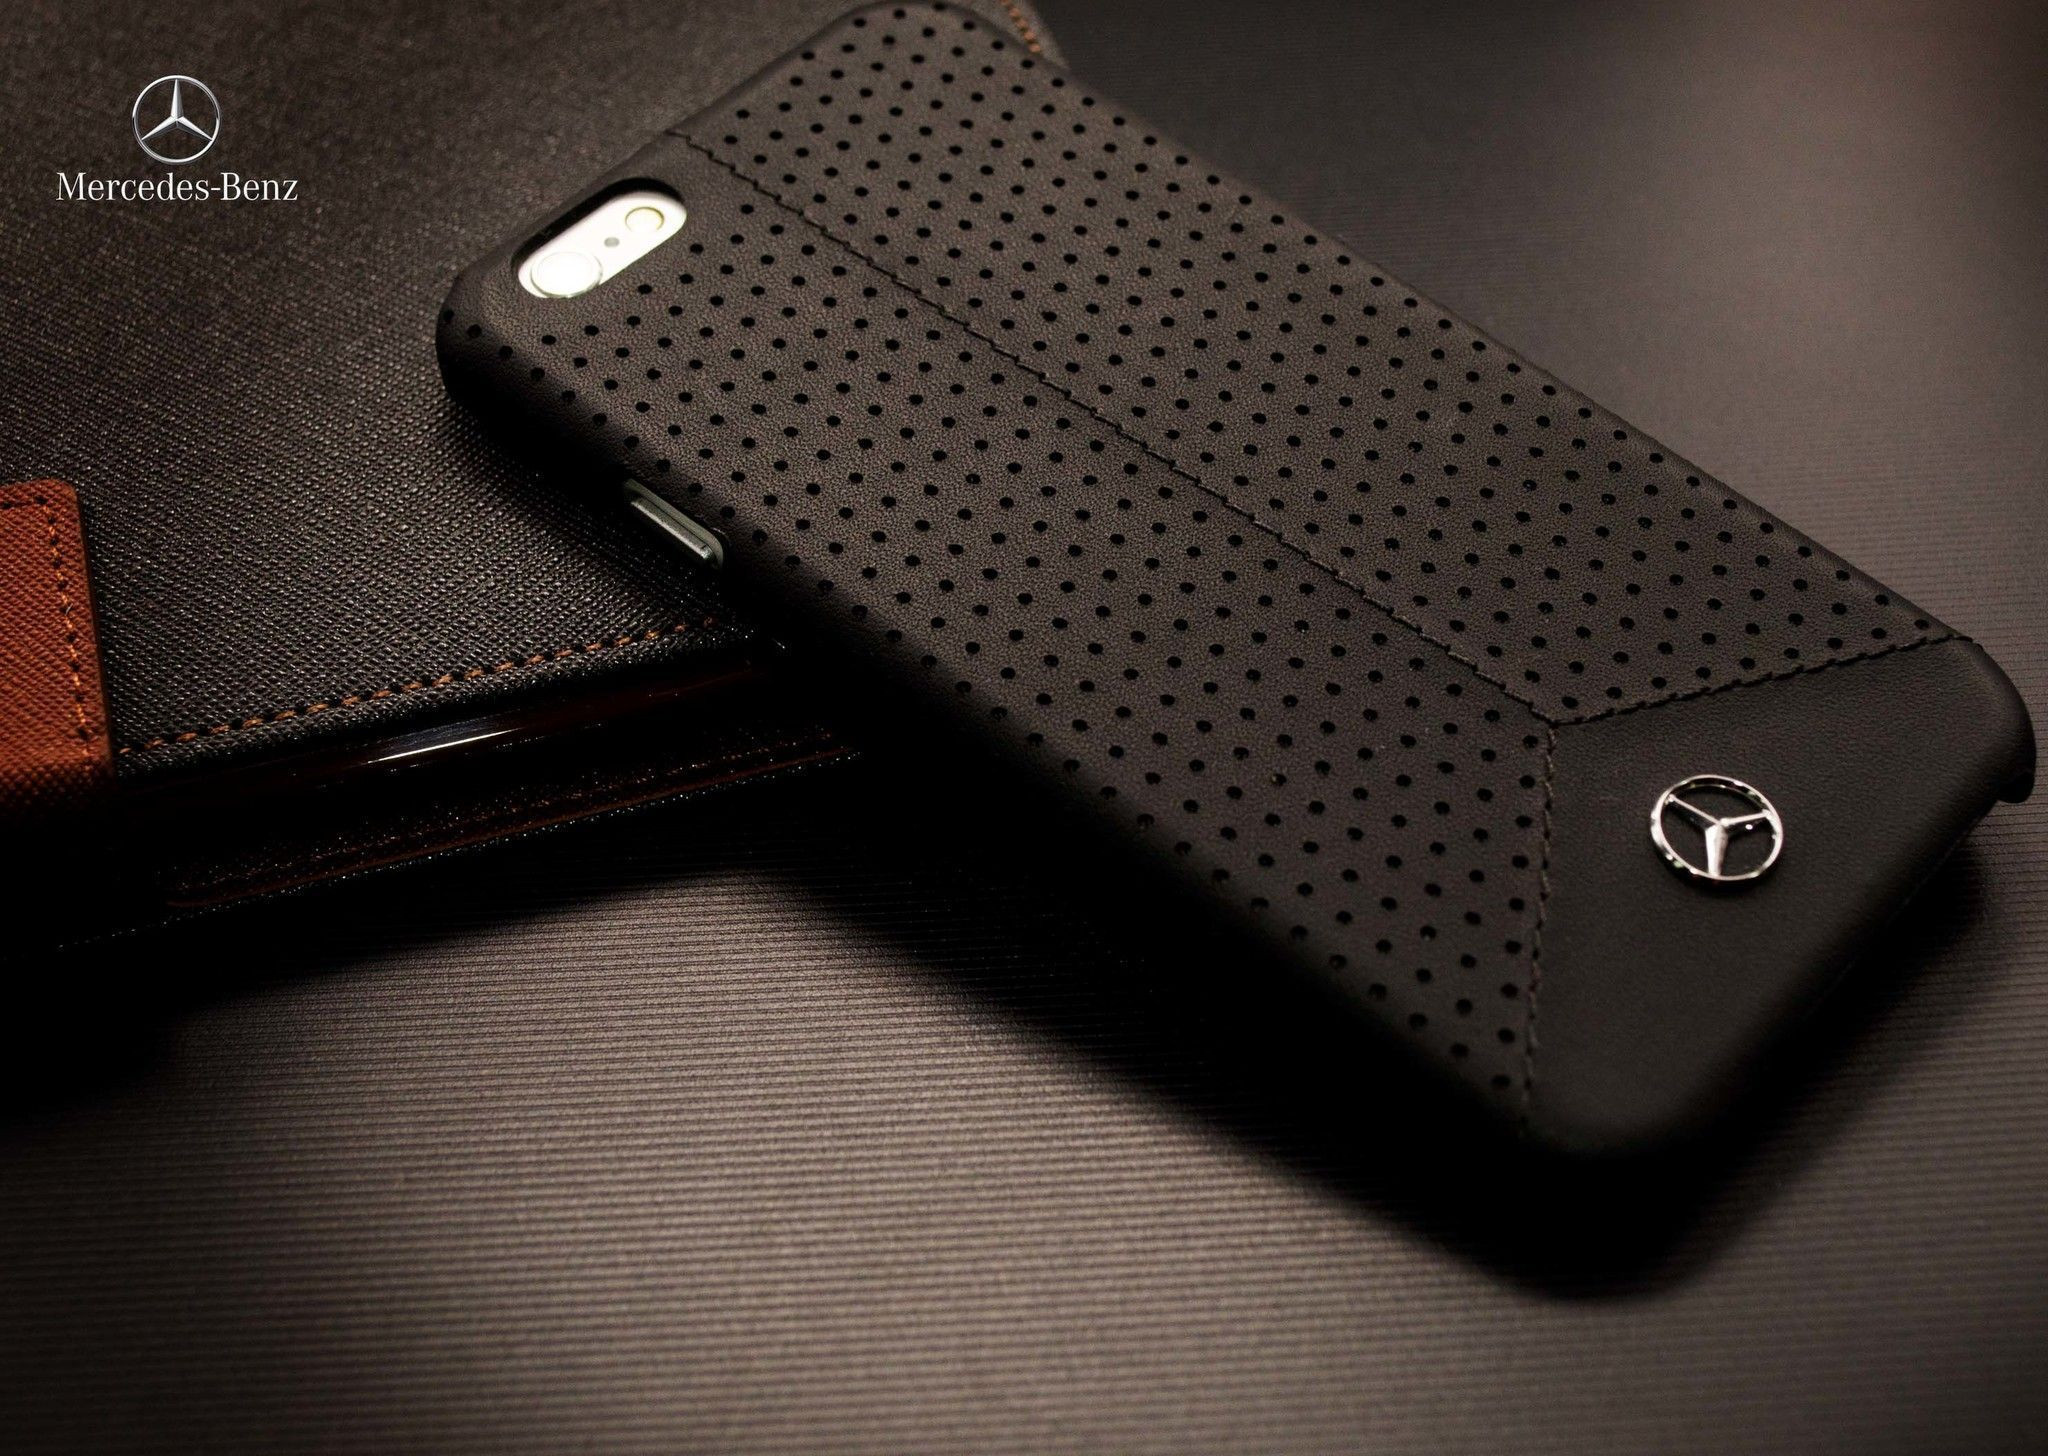 Mercedes Benz ® Apple iPhone 6 / 6S Pure Line Perforated